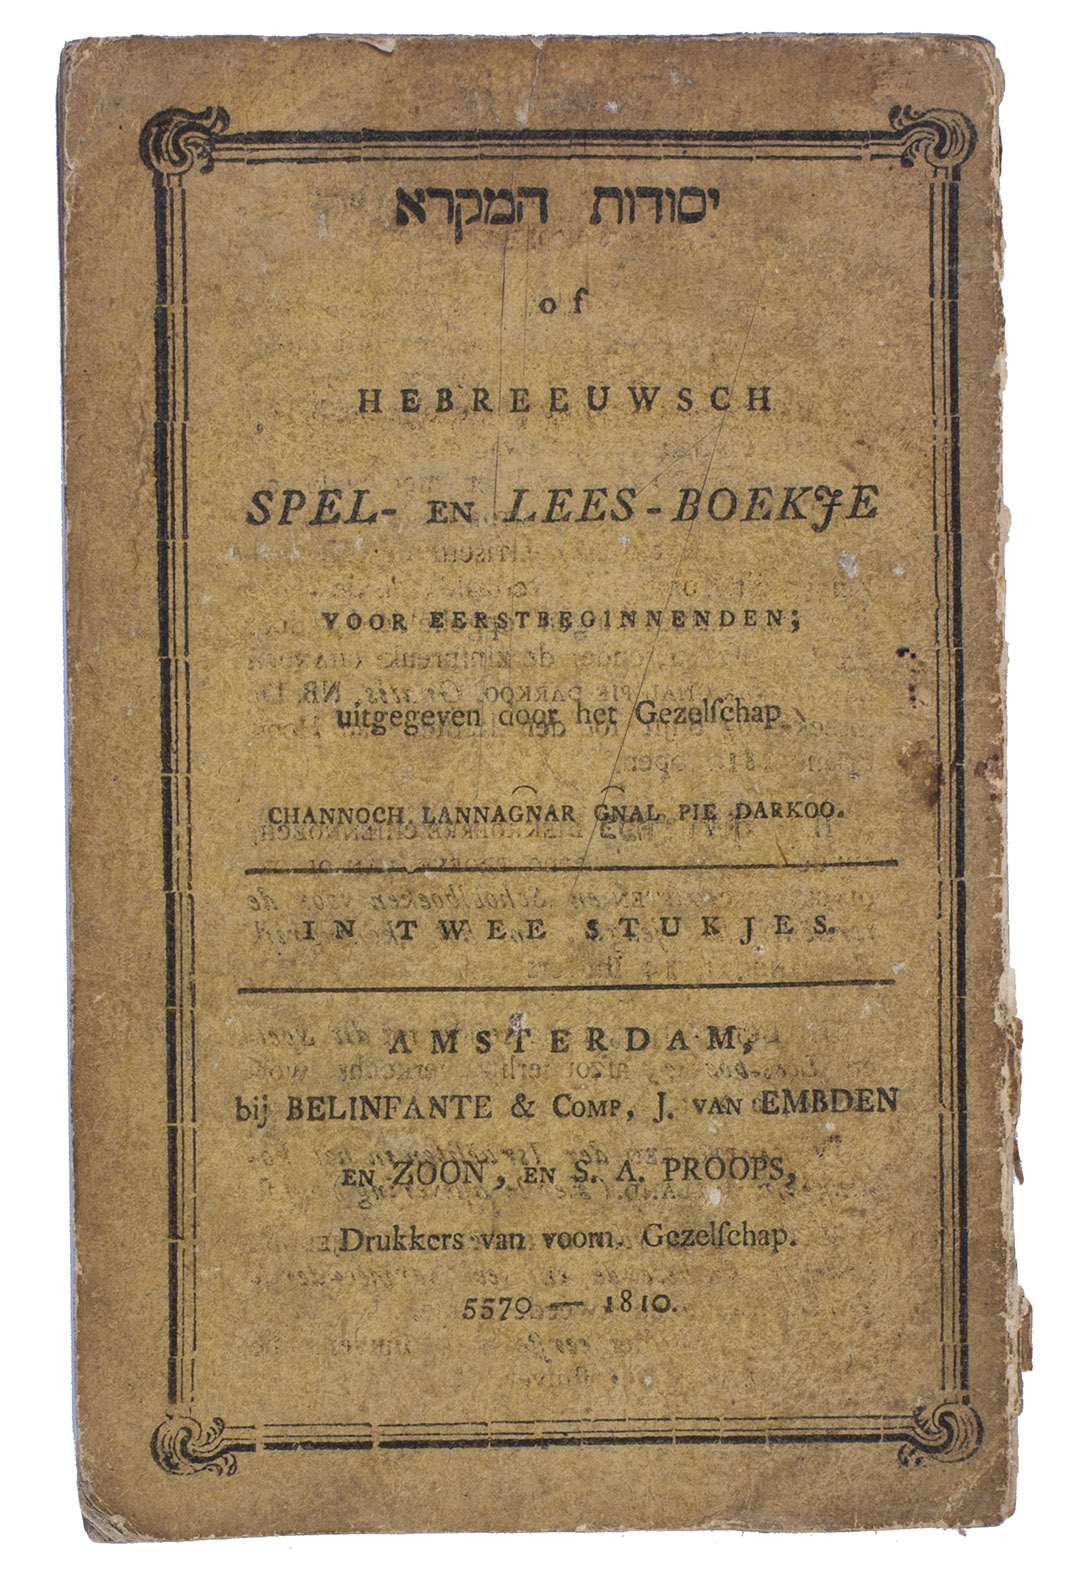 SOMMERHAUSSEN, Hartog. - Hebreeuwsch spel- en lees-boekje voor eerstbeginnenden.Amsterdam, Belinfante & Comp., J. van Embden & son, S.A. Proops, 5570 [=] 1810. 2 parts in 1 volume. Small 8vo (15.5 x 9.5 cm). With the authenticating oval stamp at the foot of the last page of the main text in part 2. Set in roman and italic type with 3 sizes of (sephardic) meruba Hebrew plus alphabets of rabbinical (semi-cursive), Yiddisch and script Hebrew types, and printed on Dutch wove paper. Publisher's original yellow, printed paper wrappers over thin boards.